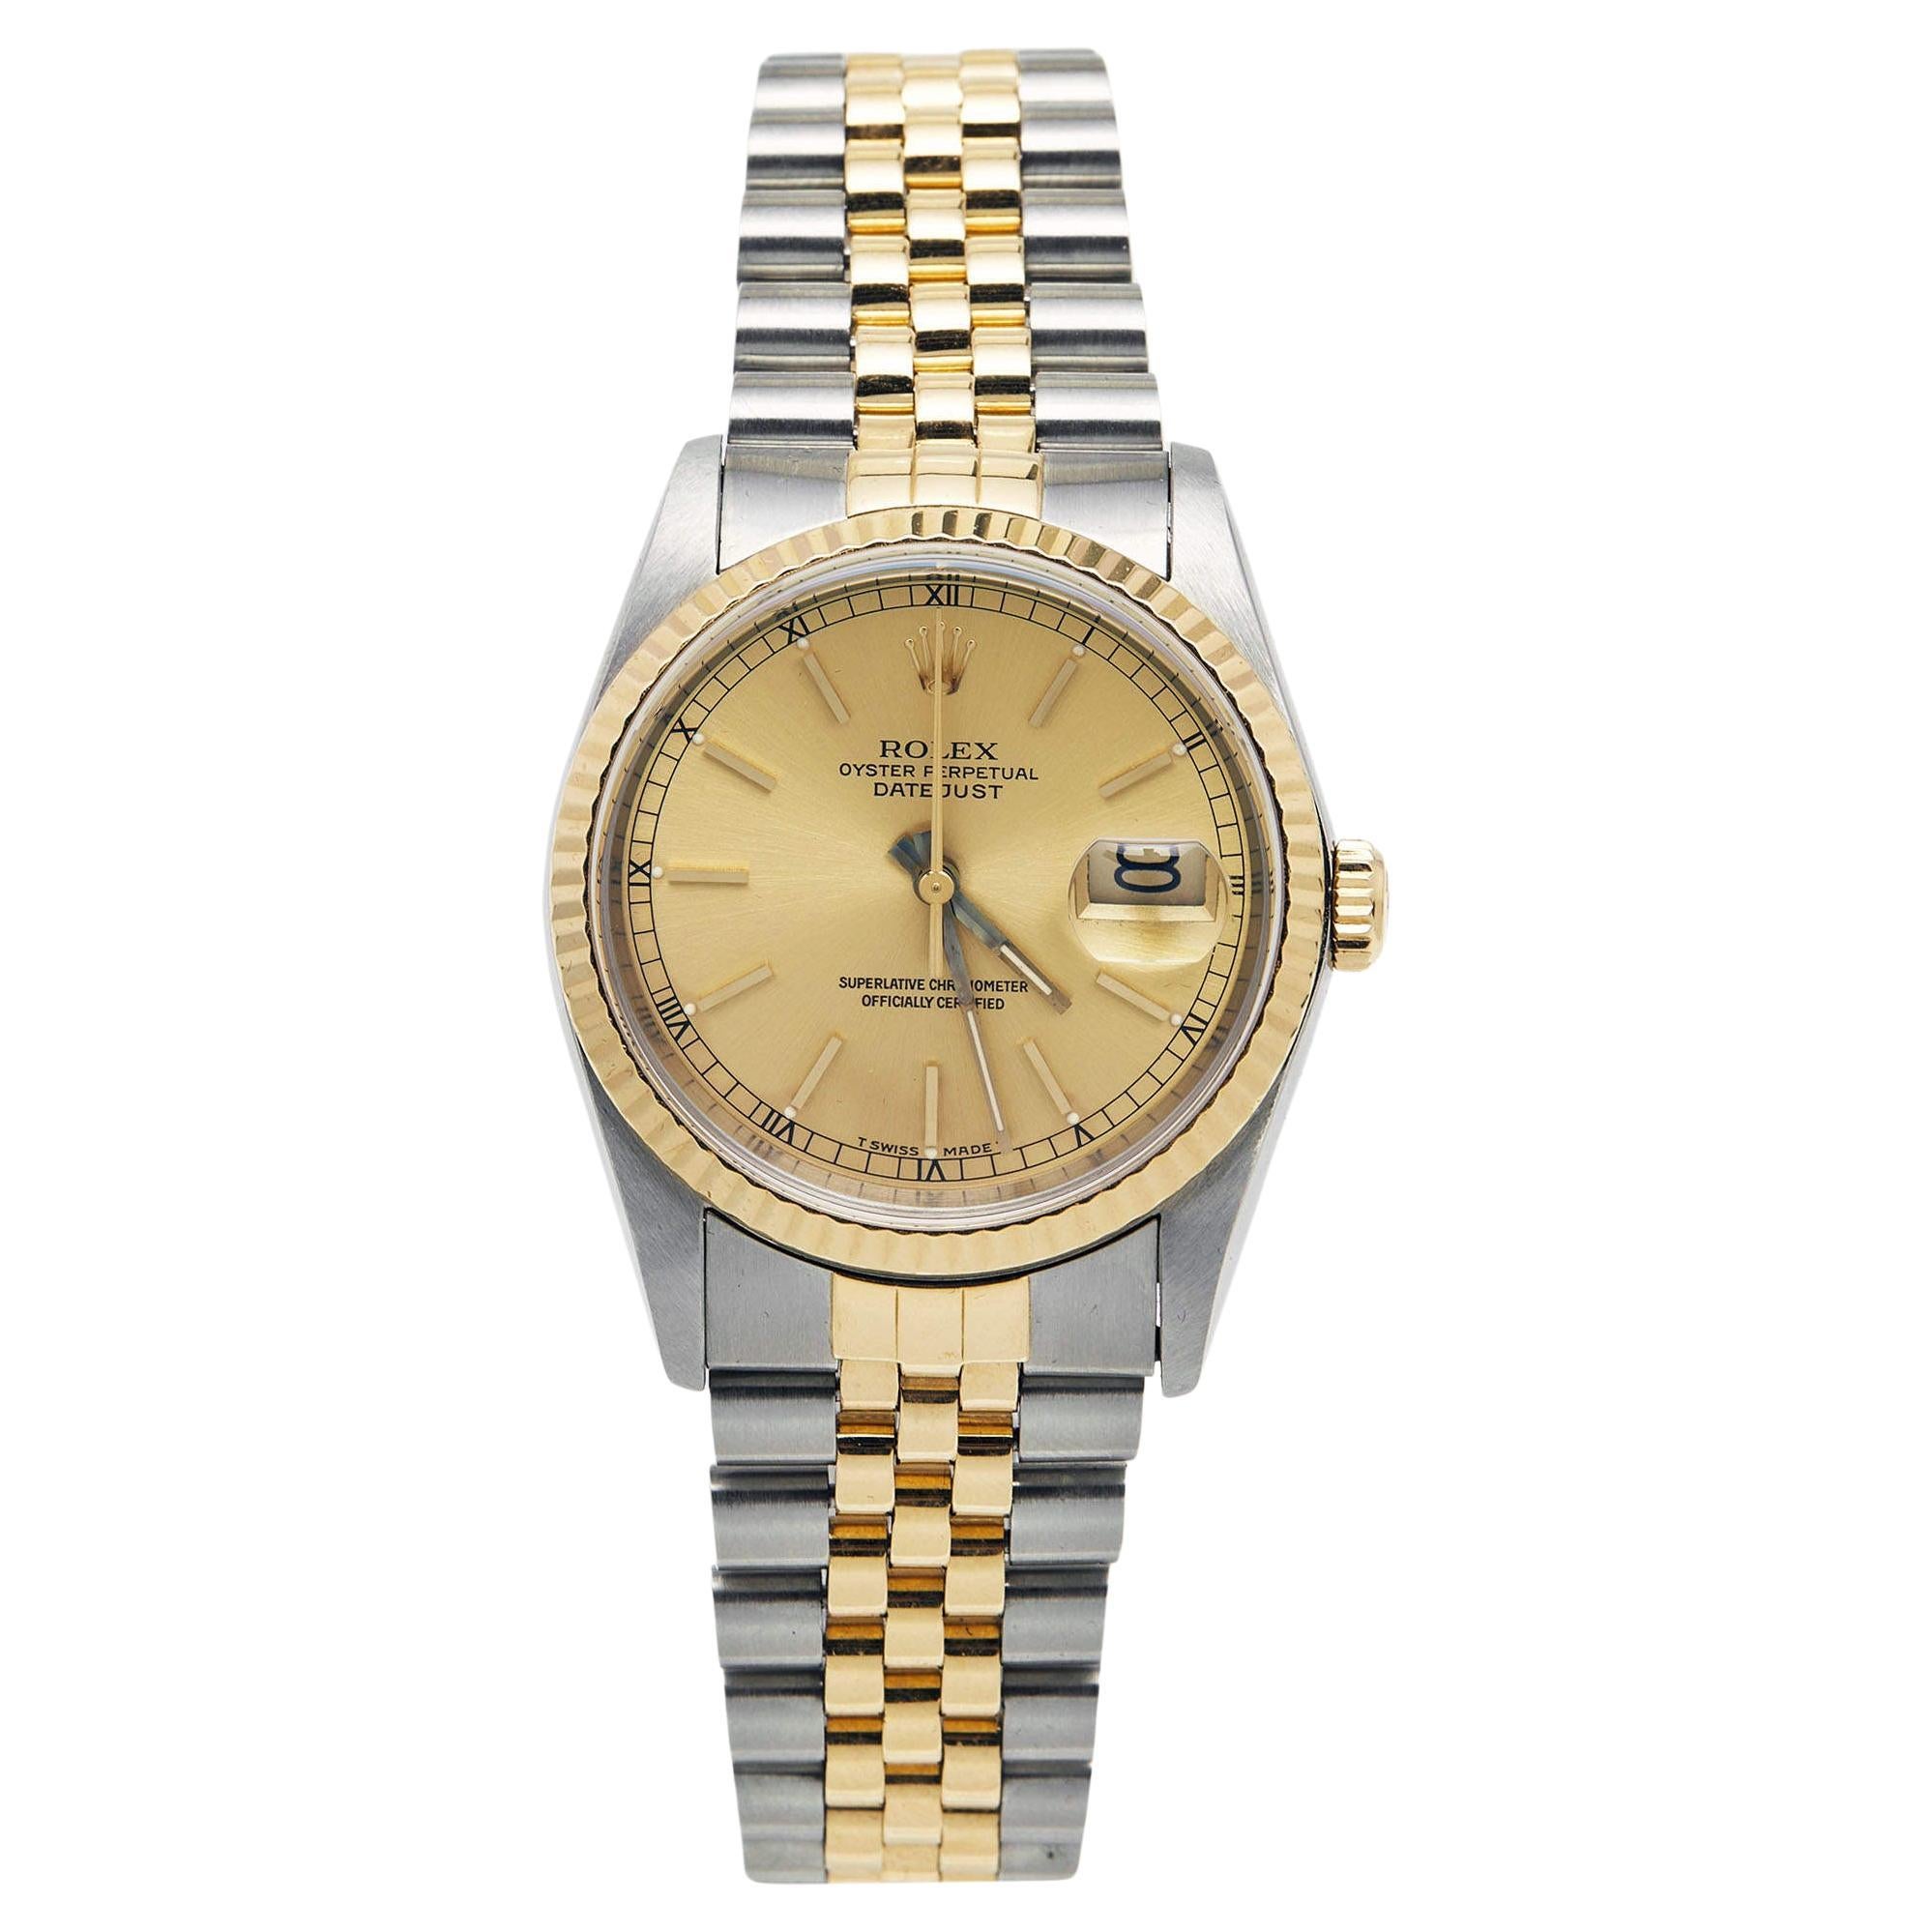 Rolex Champagne 18k Yellow Gold And Stainless Datejust Men's Wristwatch 36 mm